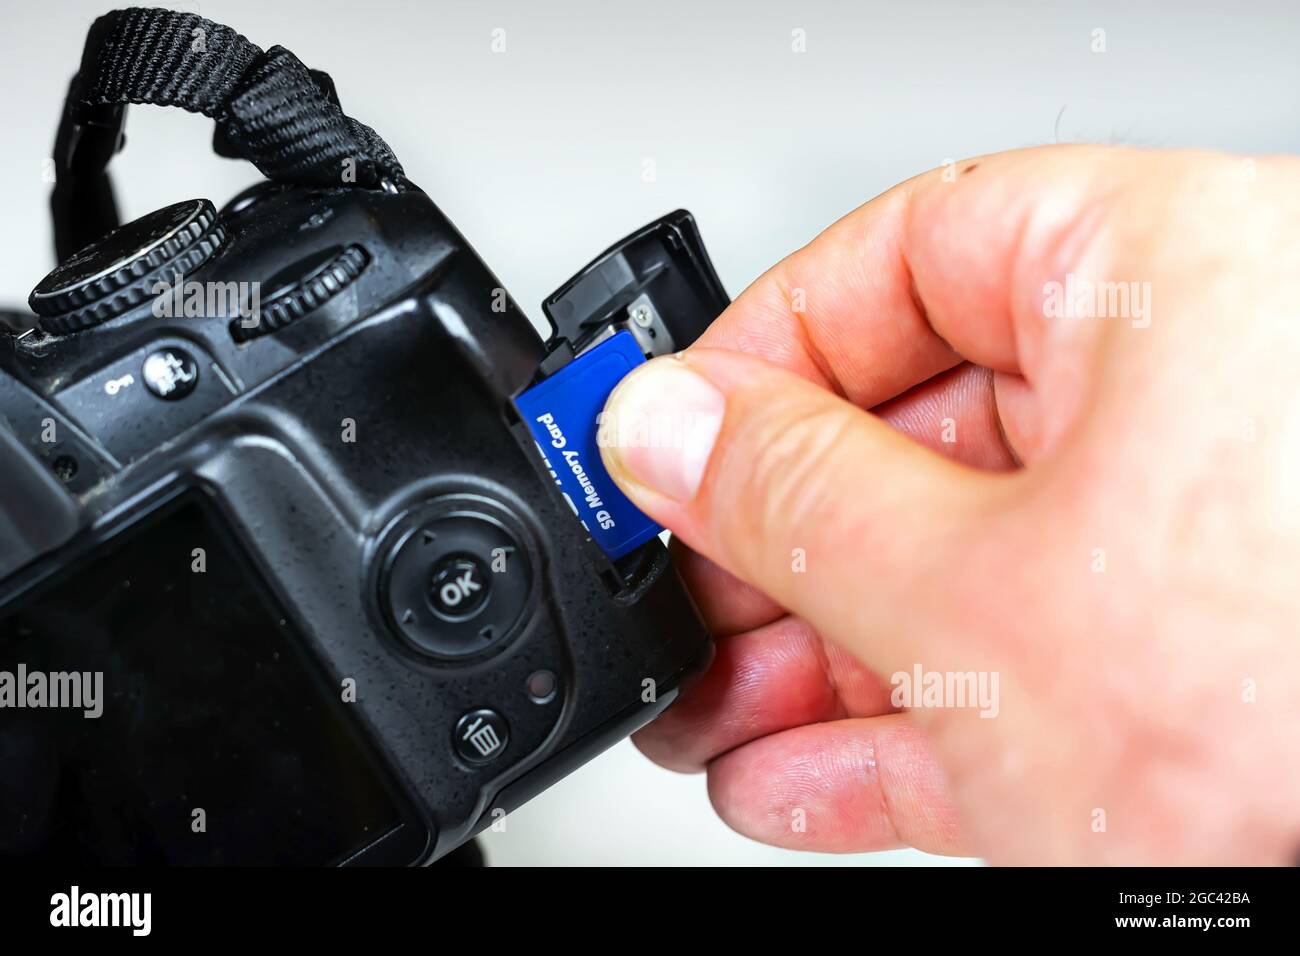 Photographer inserting or removing a blue memory card into the slot in the camera. Data storage and protection. Photographic equipment and technology Stock Photo